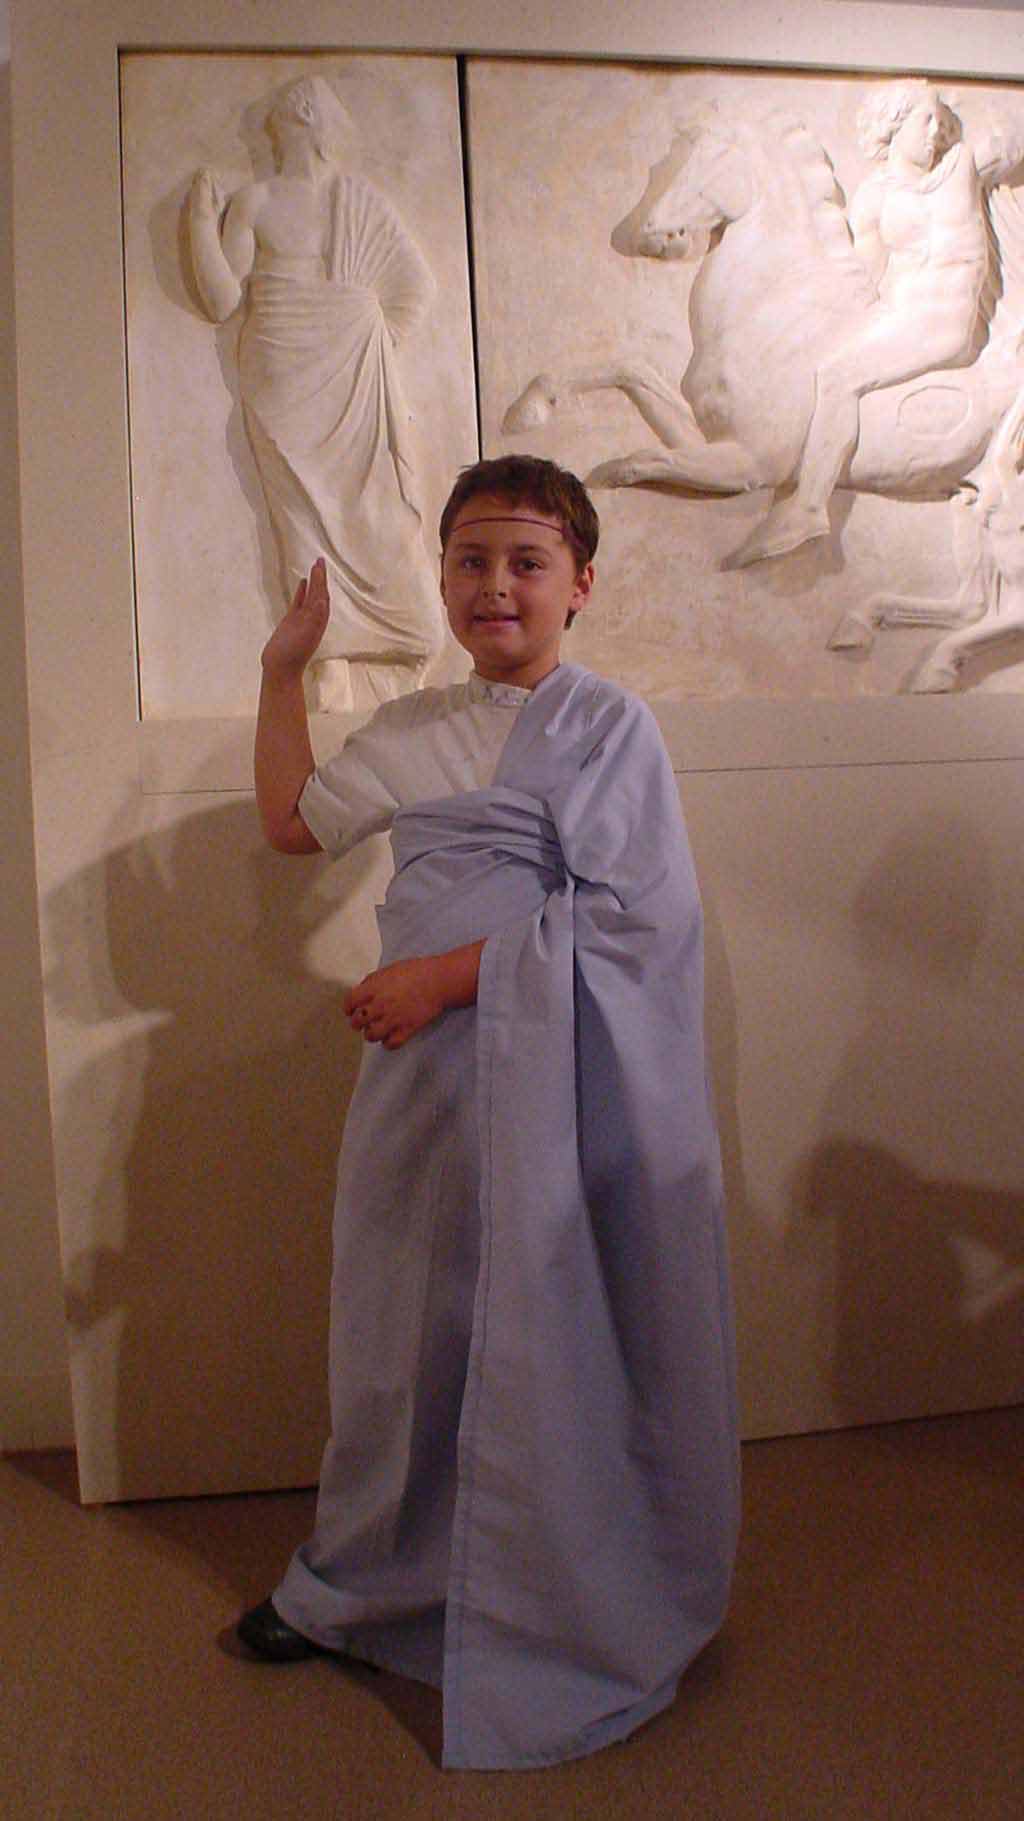 Boy in Greek-style outfit